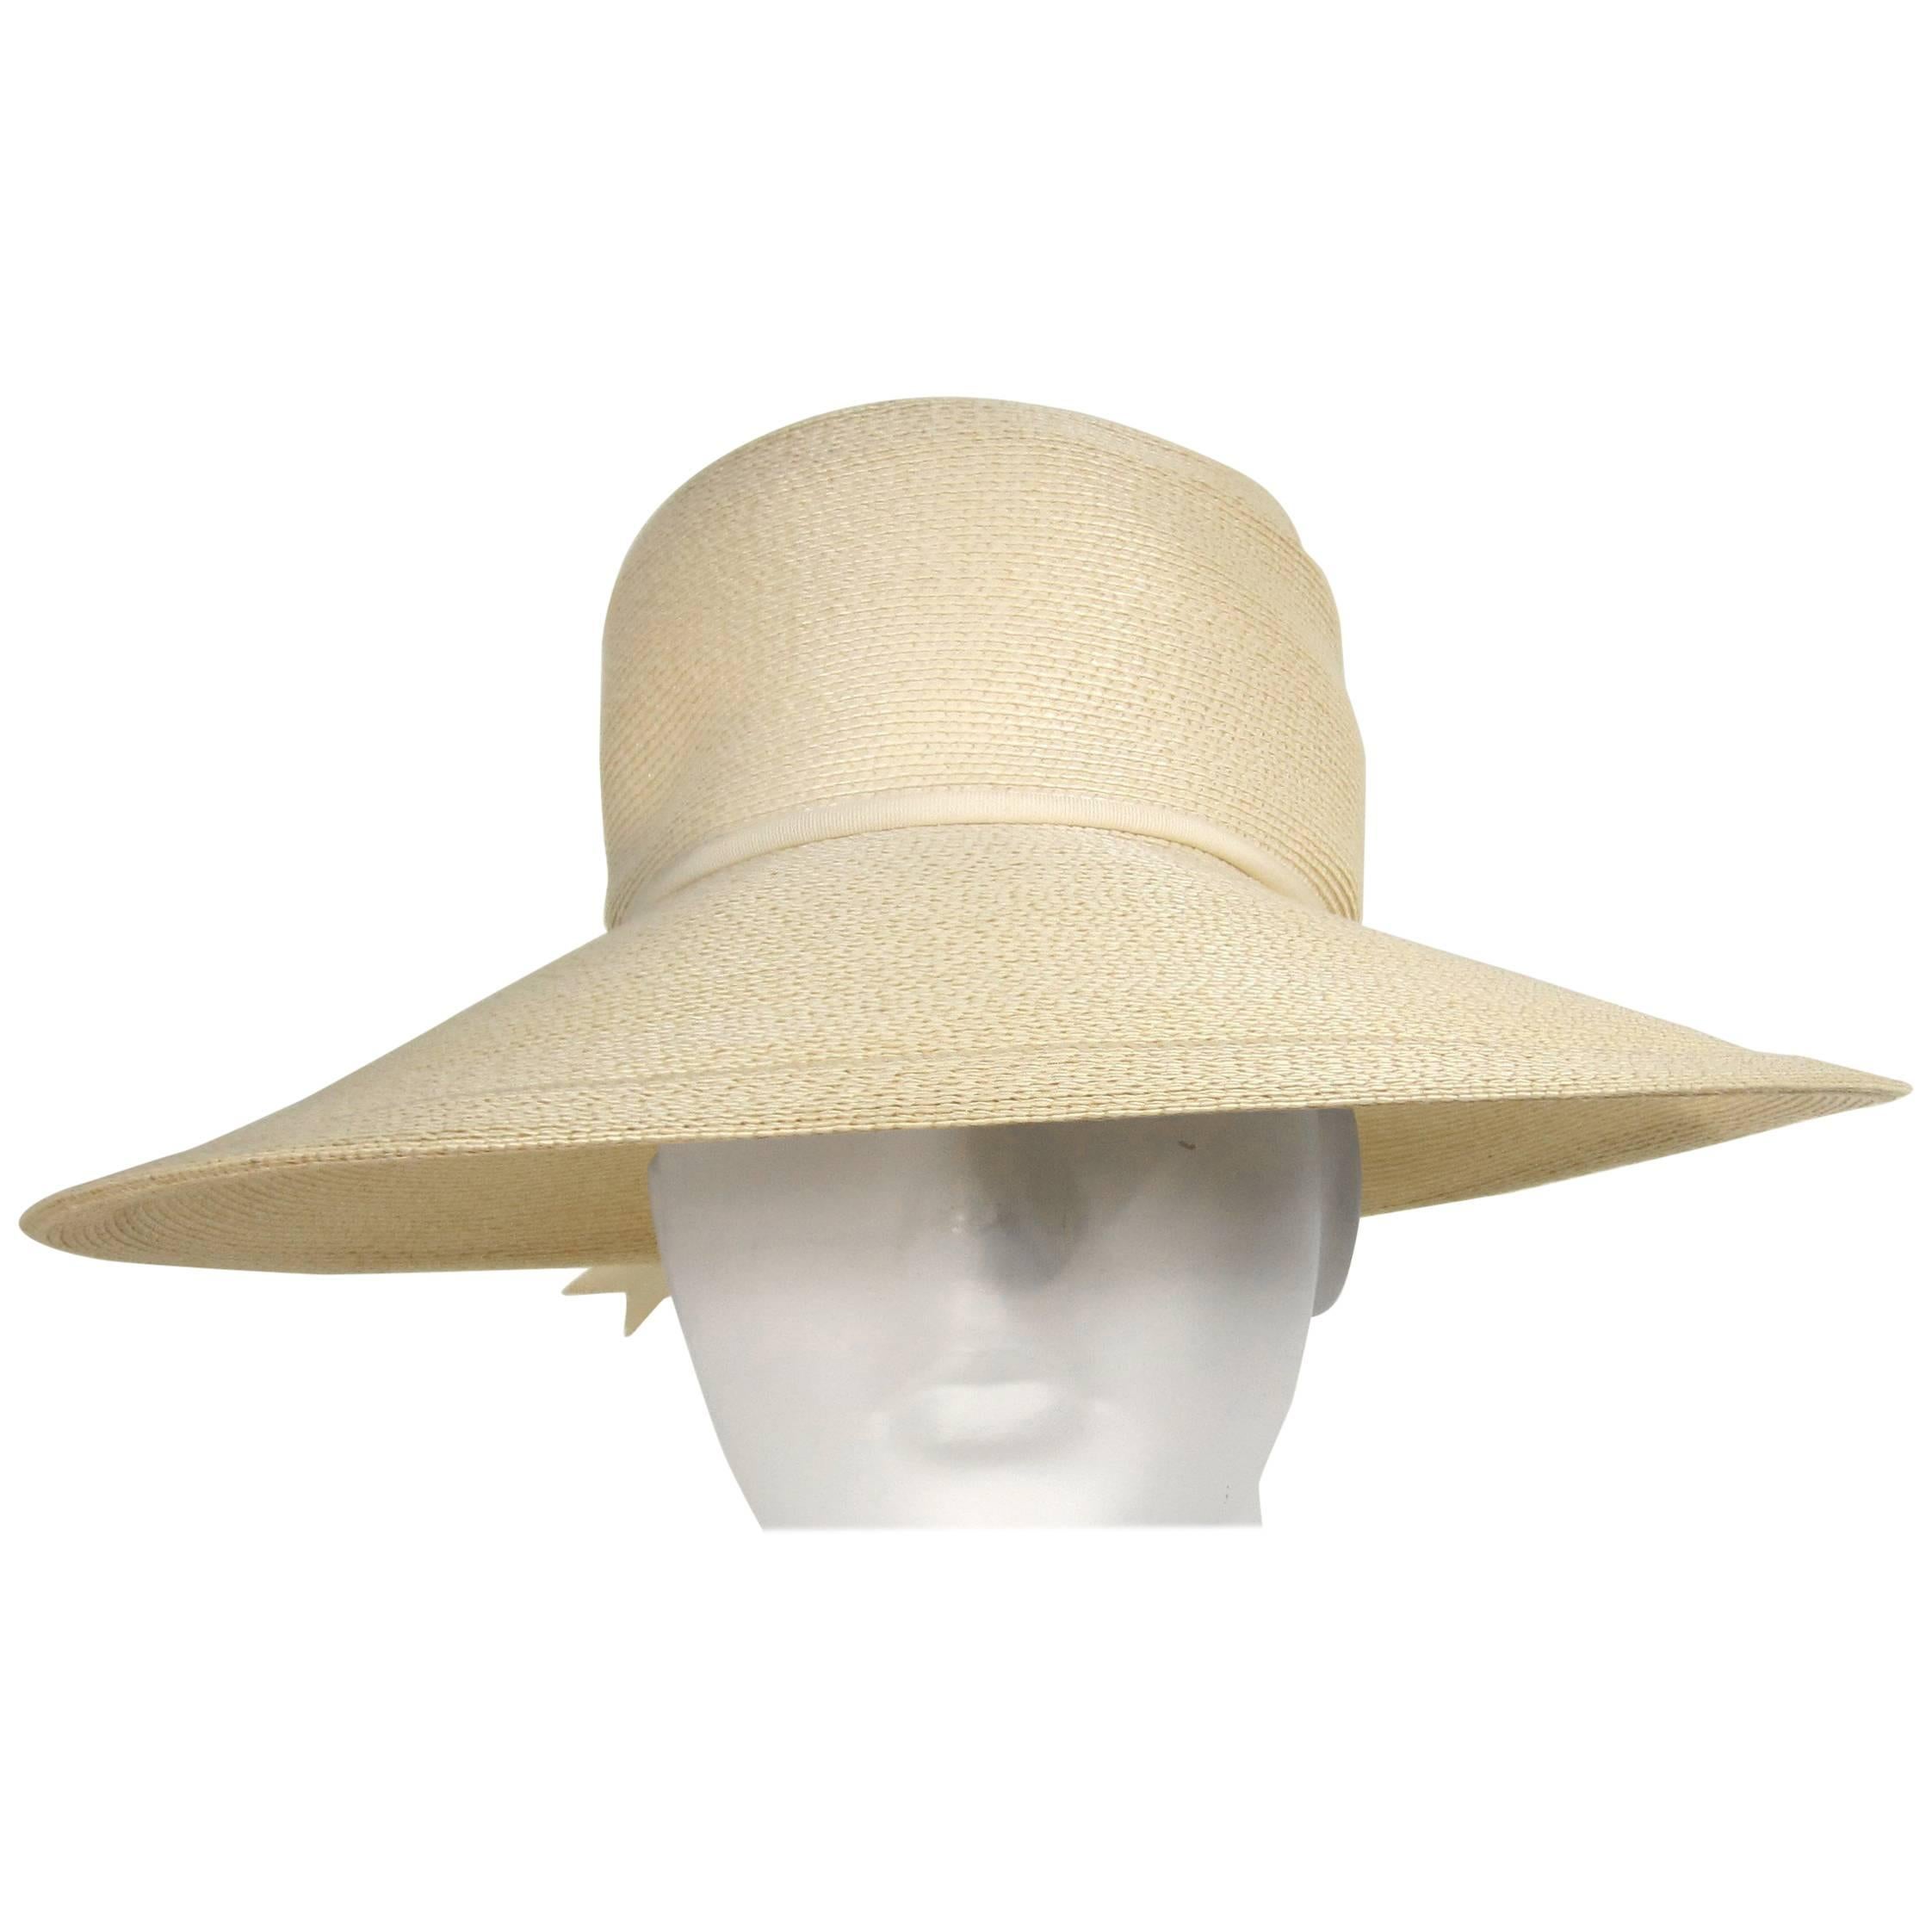 Stunning Over-sized Mr. John Vintage Beach Hat. Measuring 22.75 - 4.75 inch wide brim 4 inches high. This is out of a massive collection of Contemporary designer & Vintage clothing as well as Hopi, Zuni, Navajo, Southwestern, sterling silver,